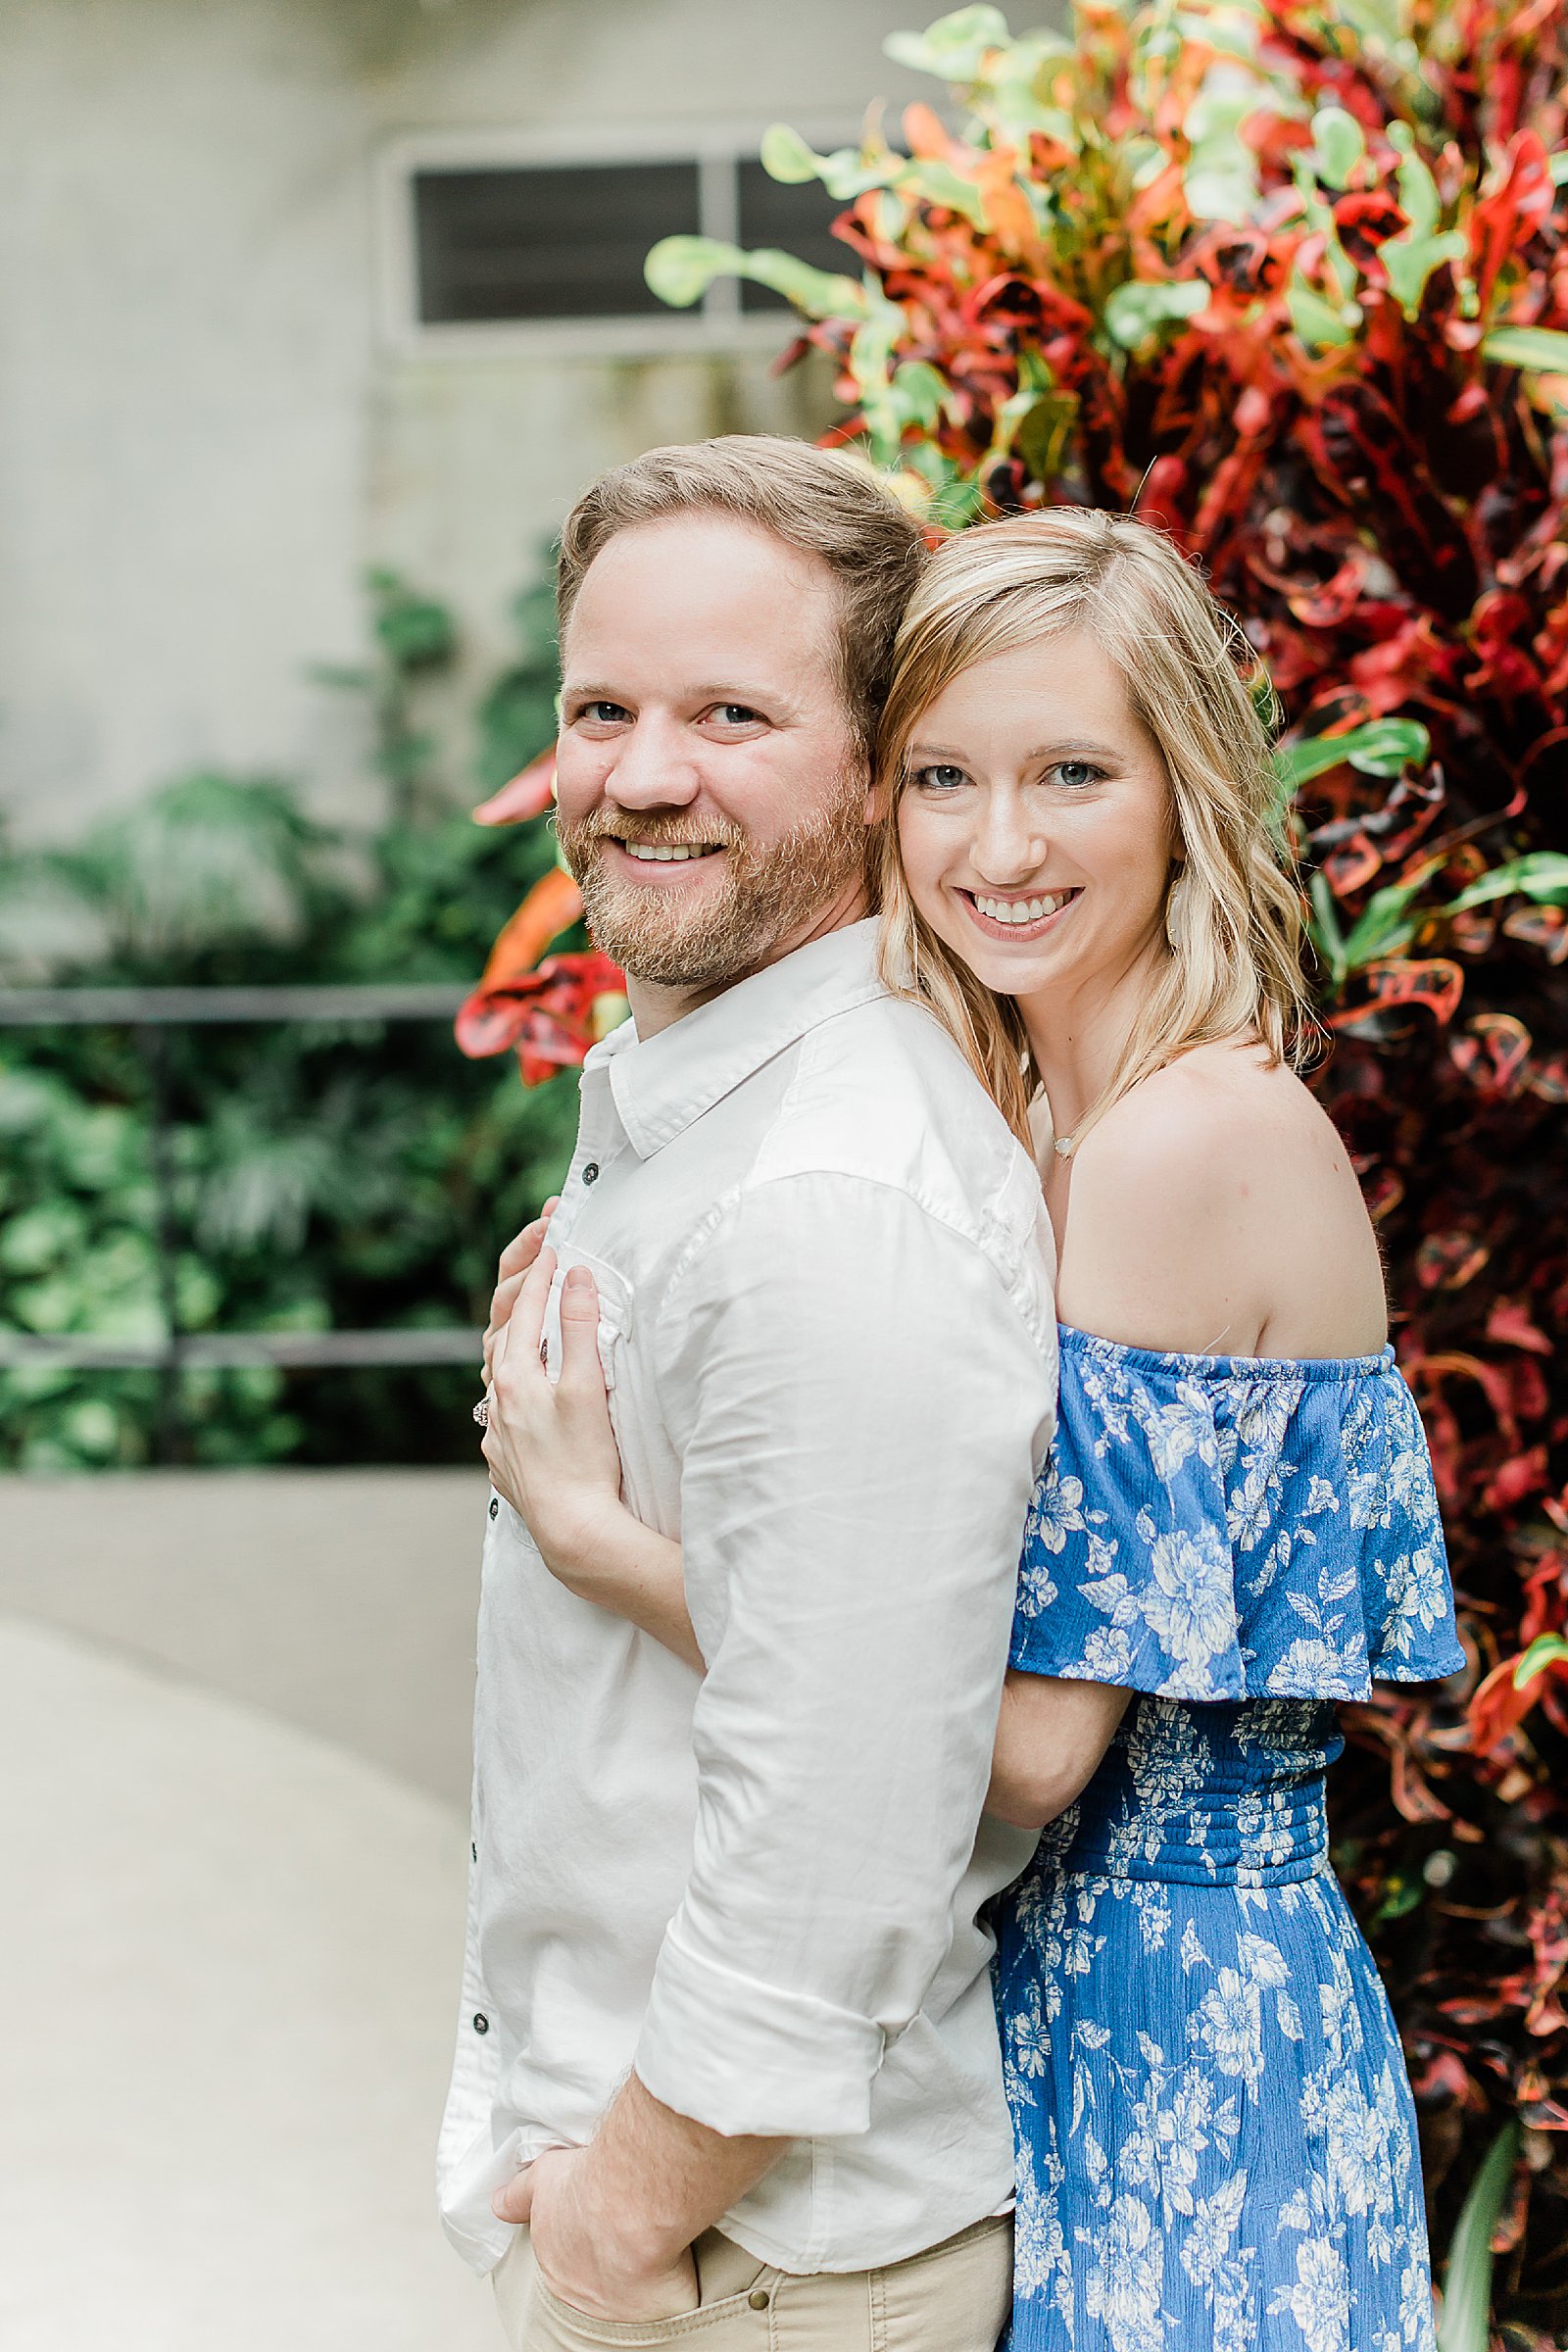 Quilt and Snugly Engagement Pictures, Anna Kay Photography, San Antonio Wedding Photography